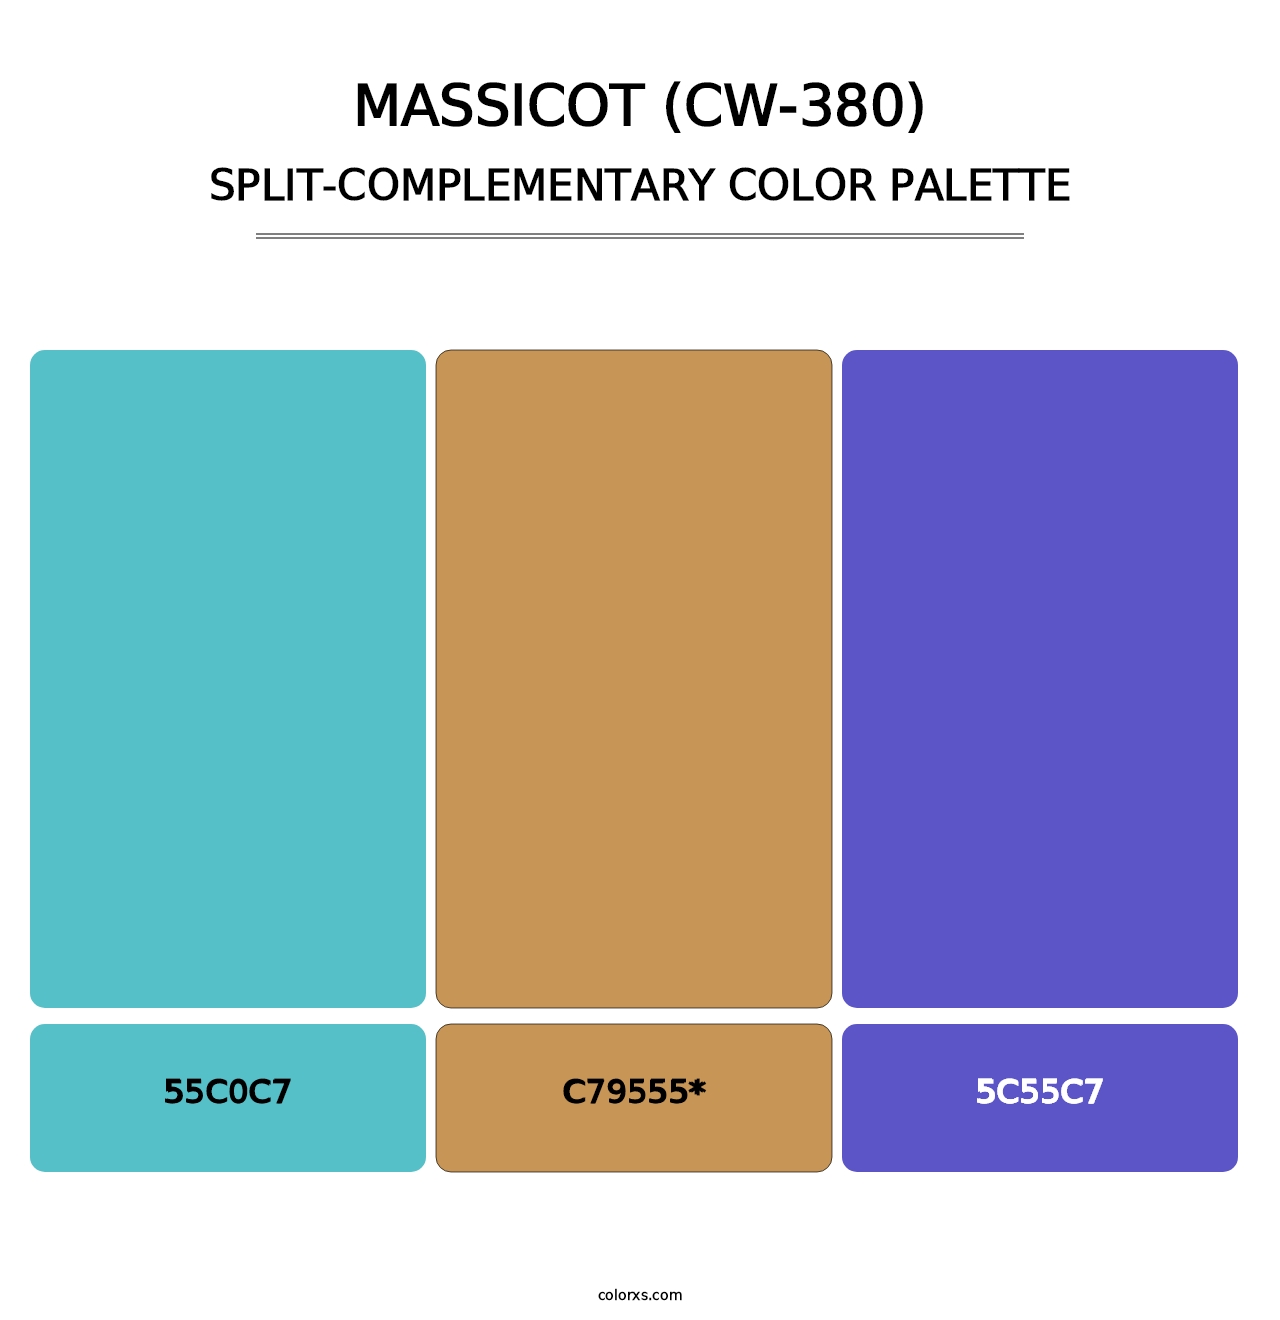 Massicot (CW-380) - Split-Complementary Color Palette